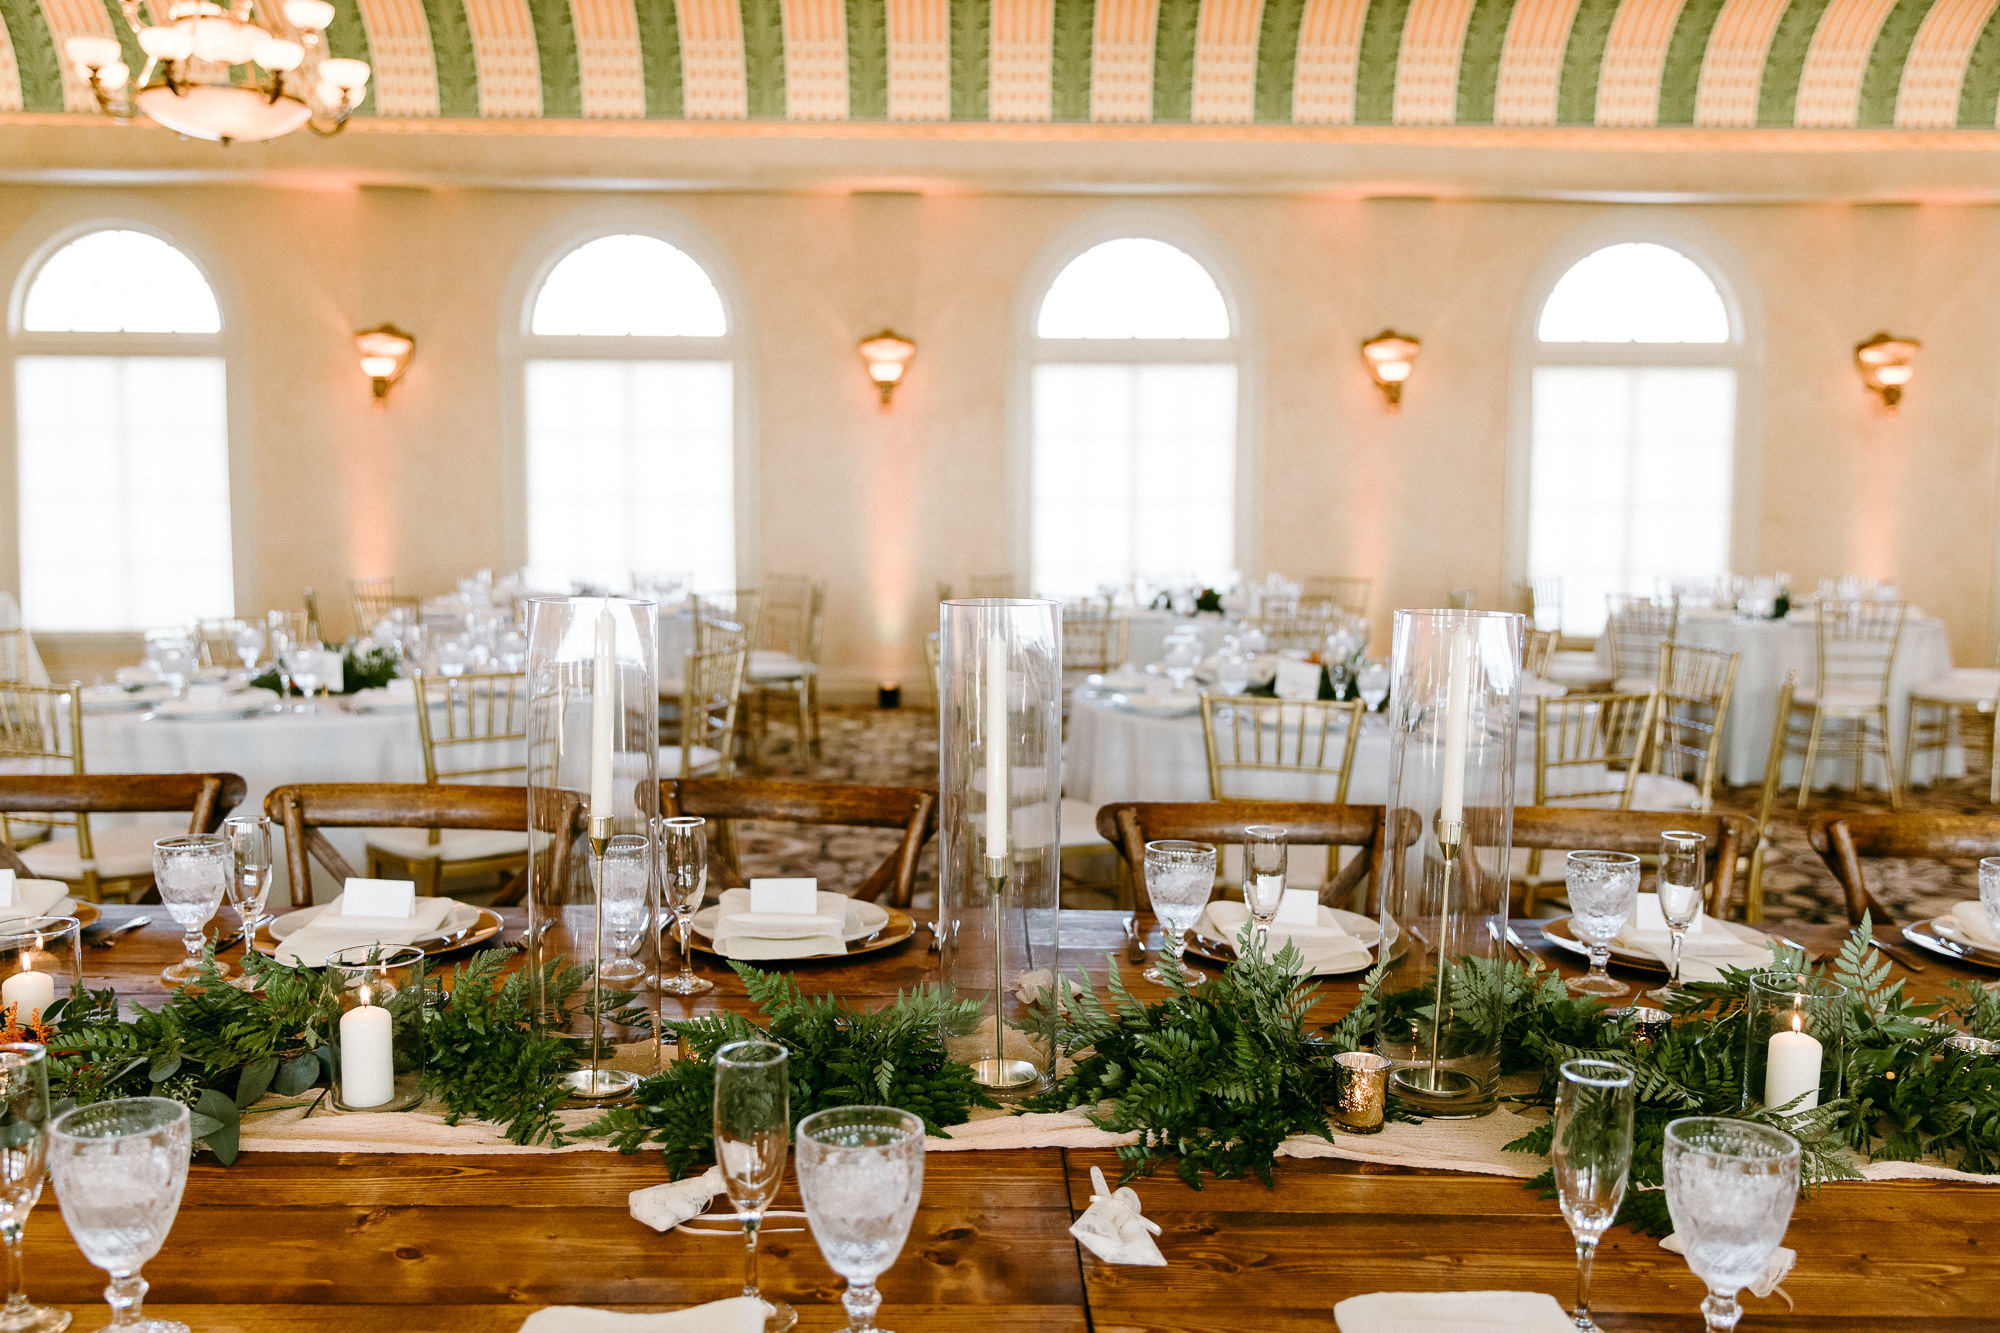 Rustic Italian Elegant Wedding Reception Decor, Ivory Cheesecloth Table Runner, Greenery, Candlesticks in Hurricane Glass Vases, Neon Sign, Rectangular Arch with Greenery, Long Wooden Feasting Table | Tampa Bay Wedding Rentals Outside the Box Rentals